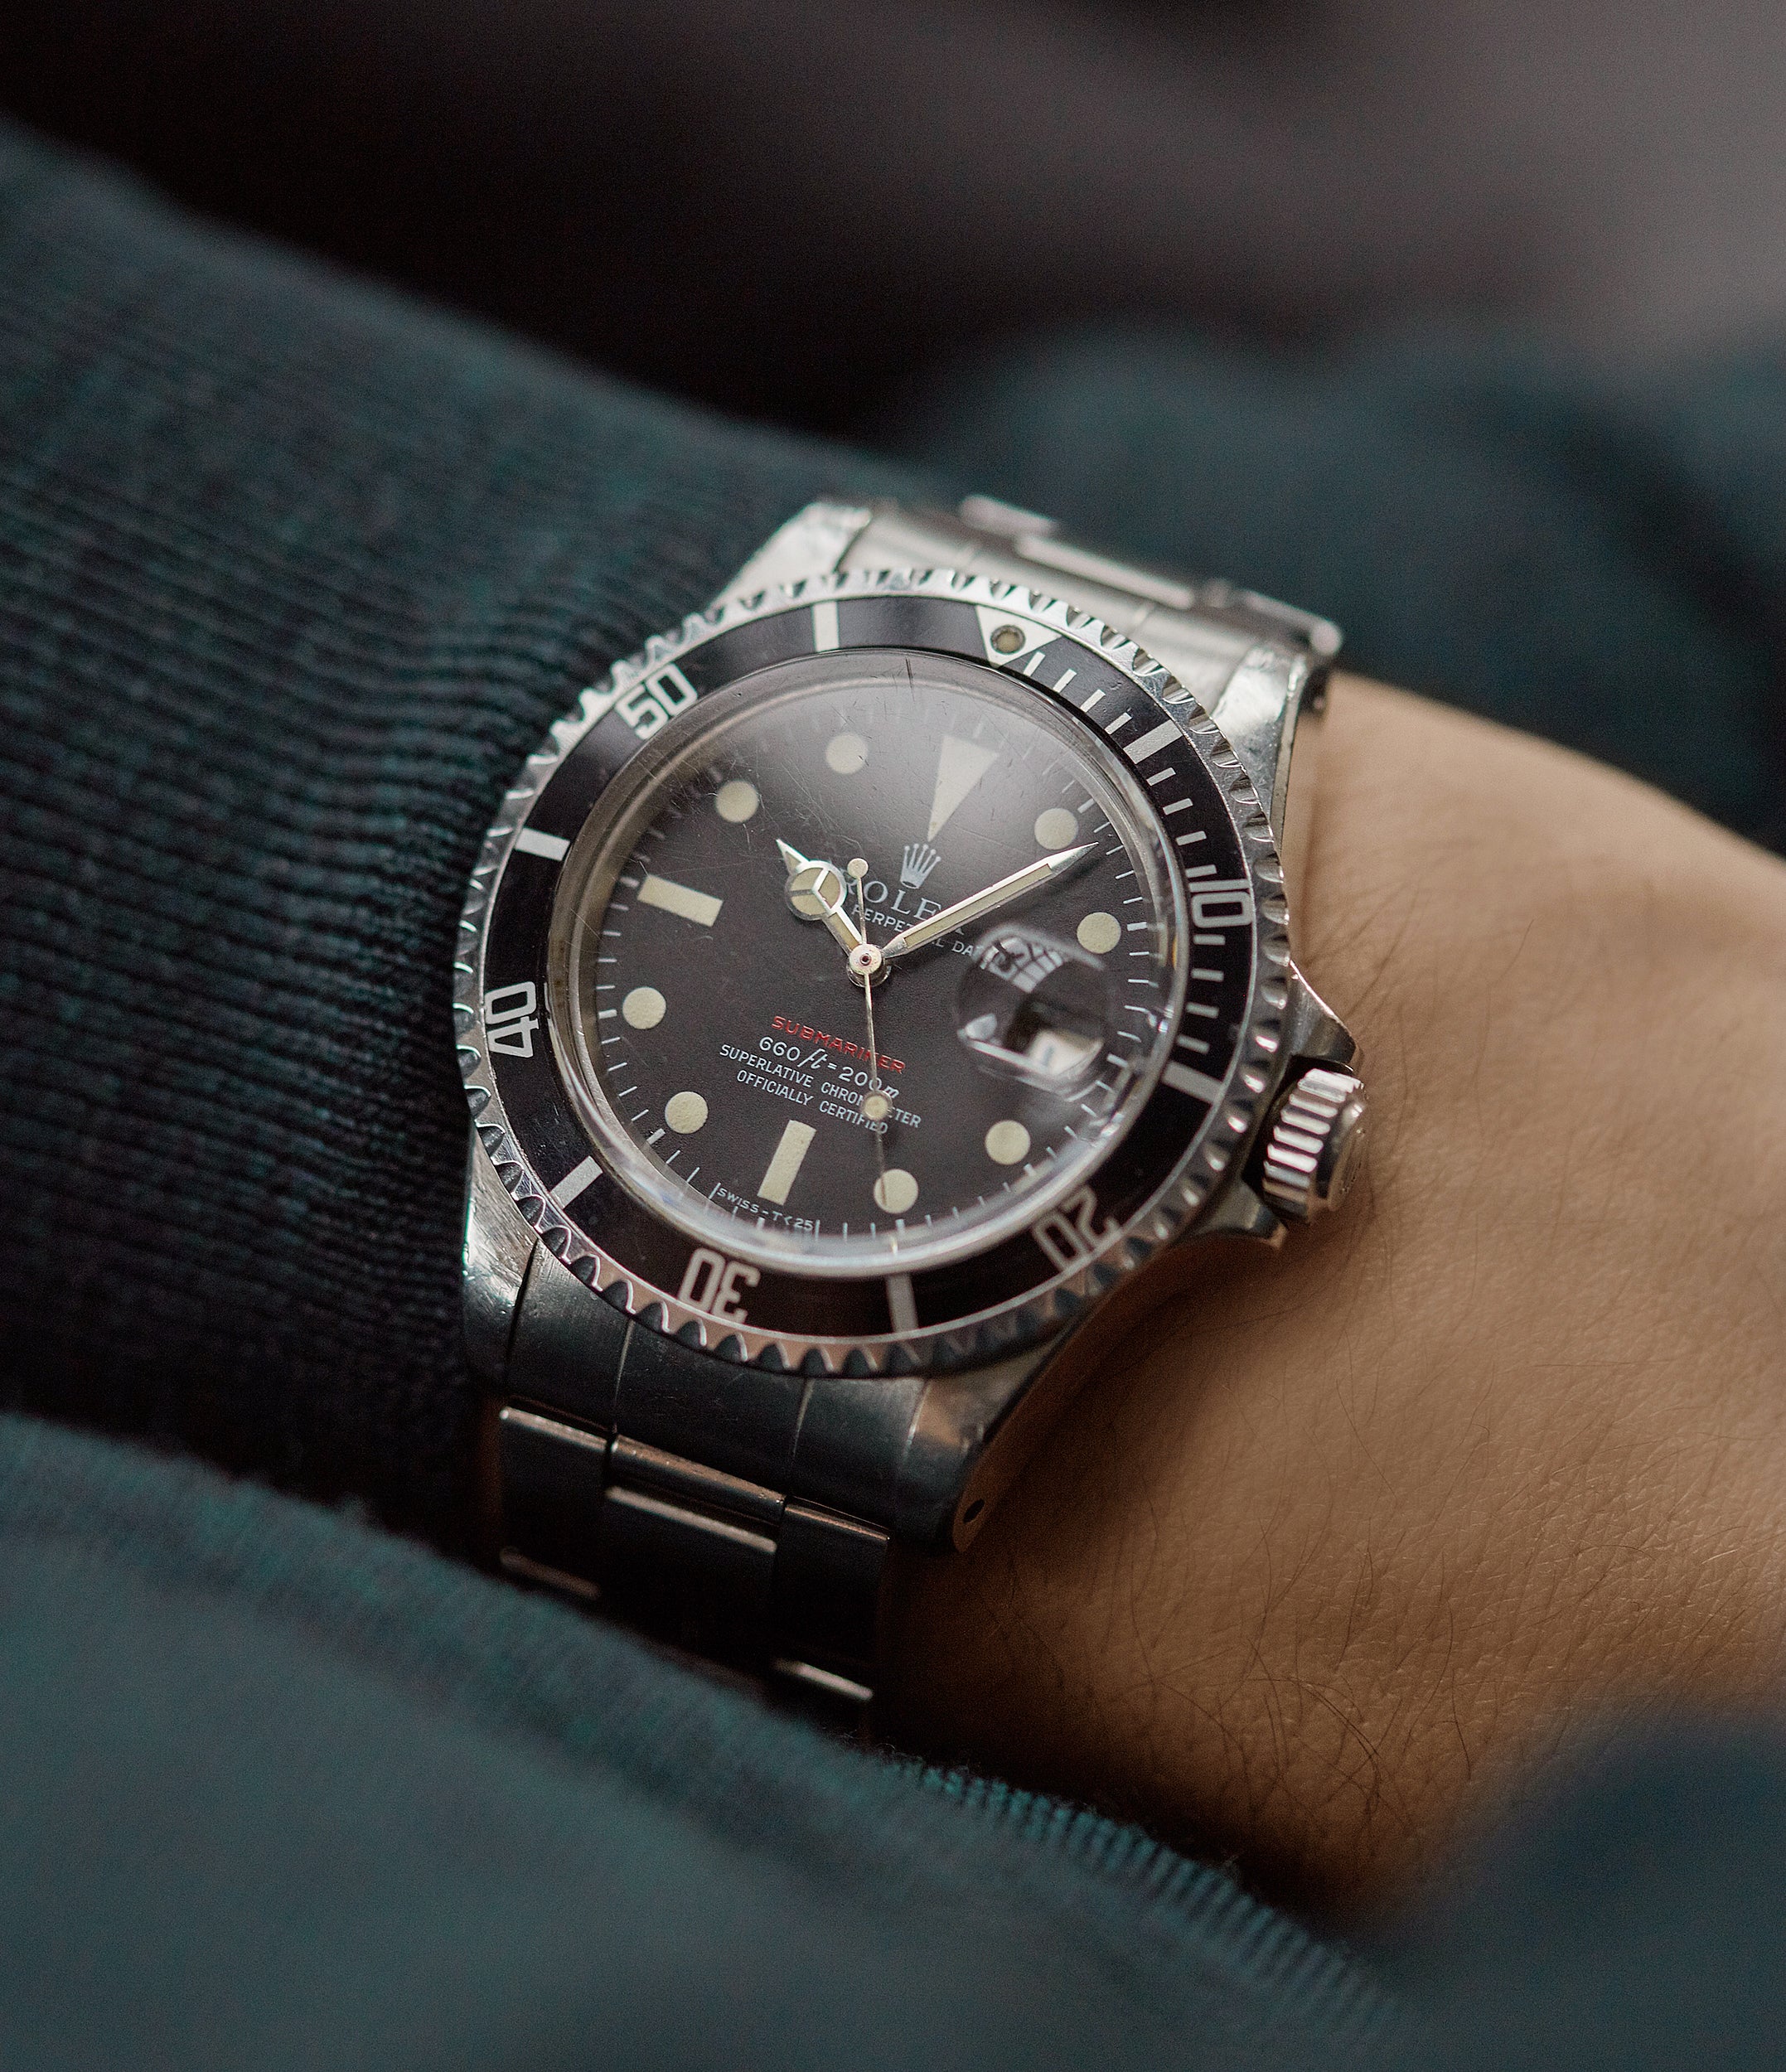 Rolex Submariner 1680 | Buy Rolex 1680 watch – A COLLECTED